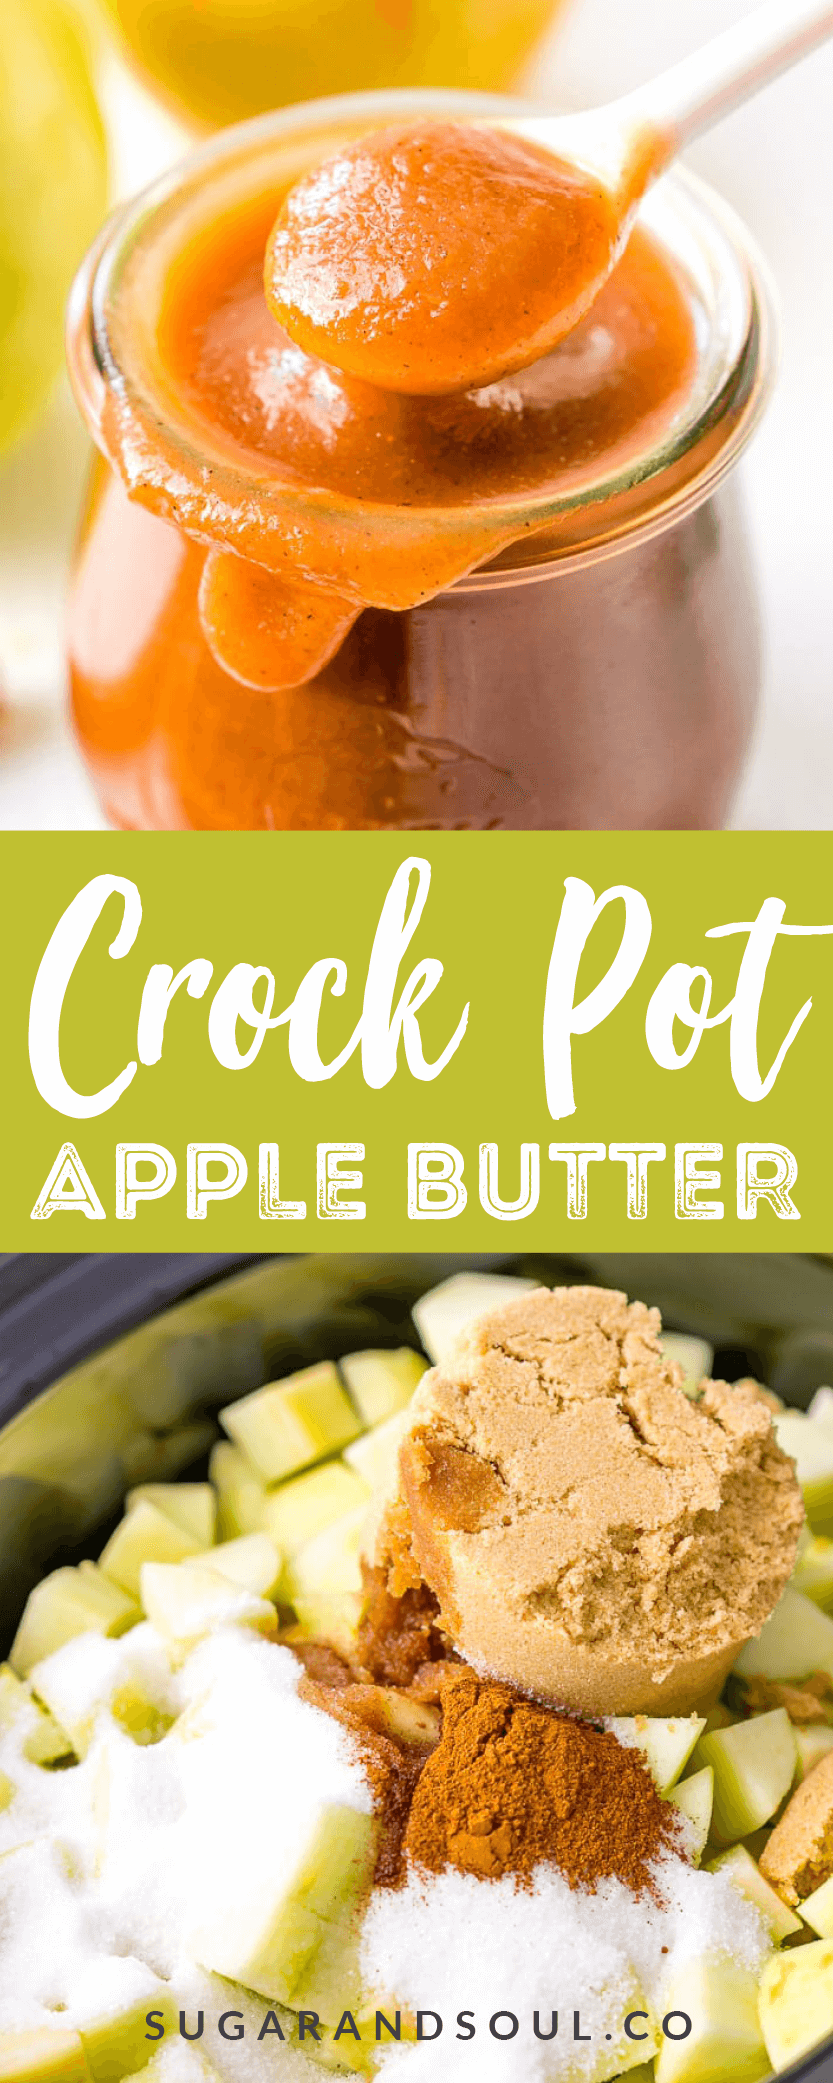 Homemade Crockpot Apple Butter is the perfect way to enjoy the fresh taste of fall apples all season long! Made with apples, sugar, spices, and butter, you can spread it on all your favorite baked goods, mix it into recipes, and more!